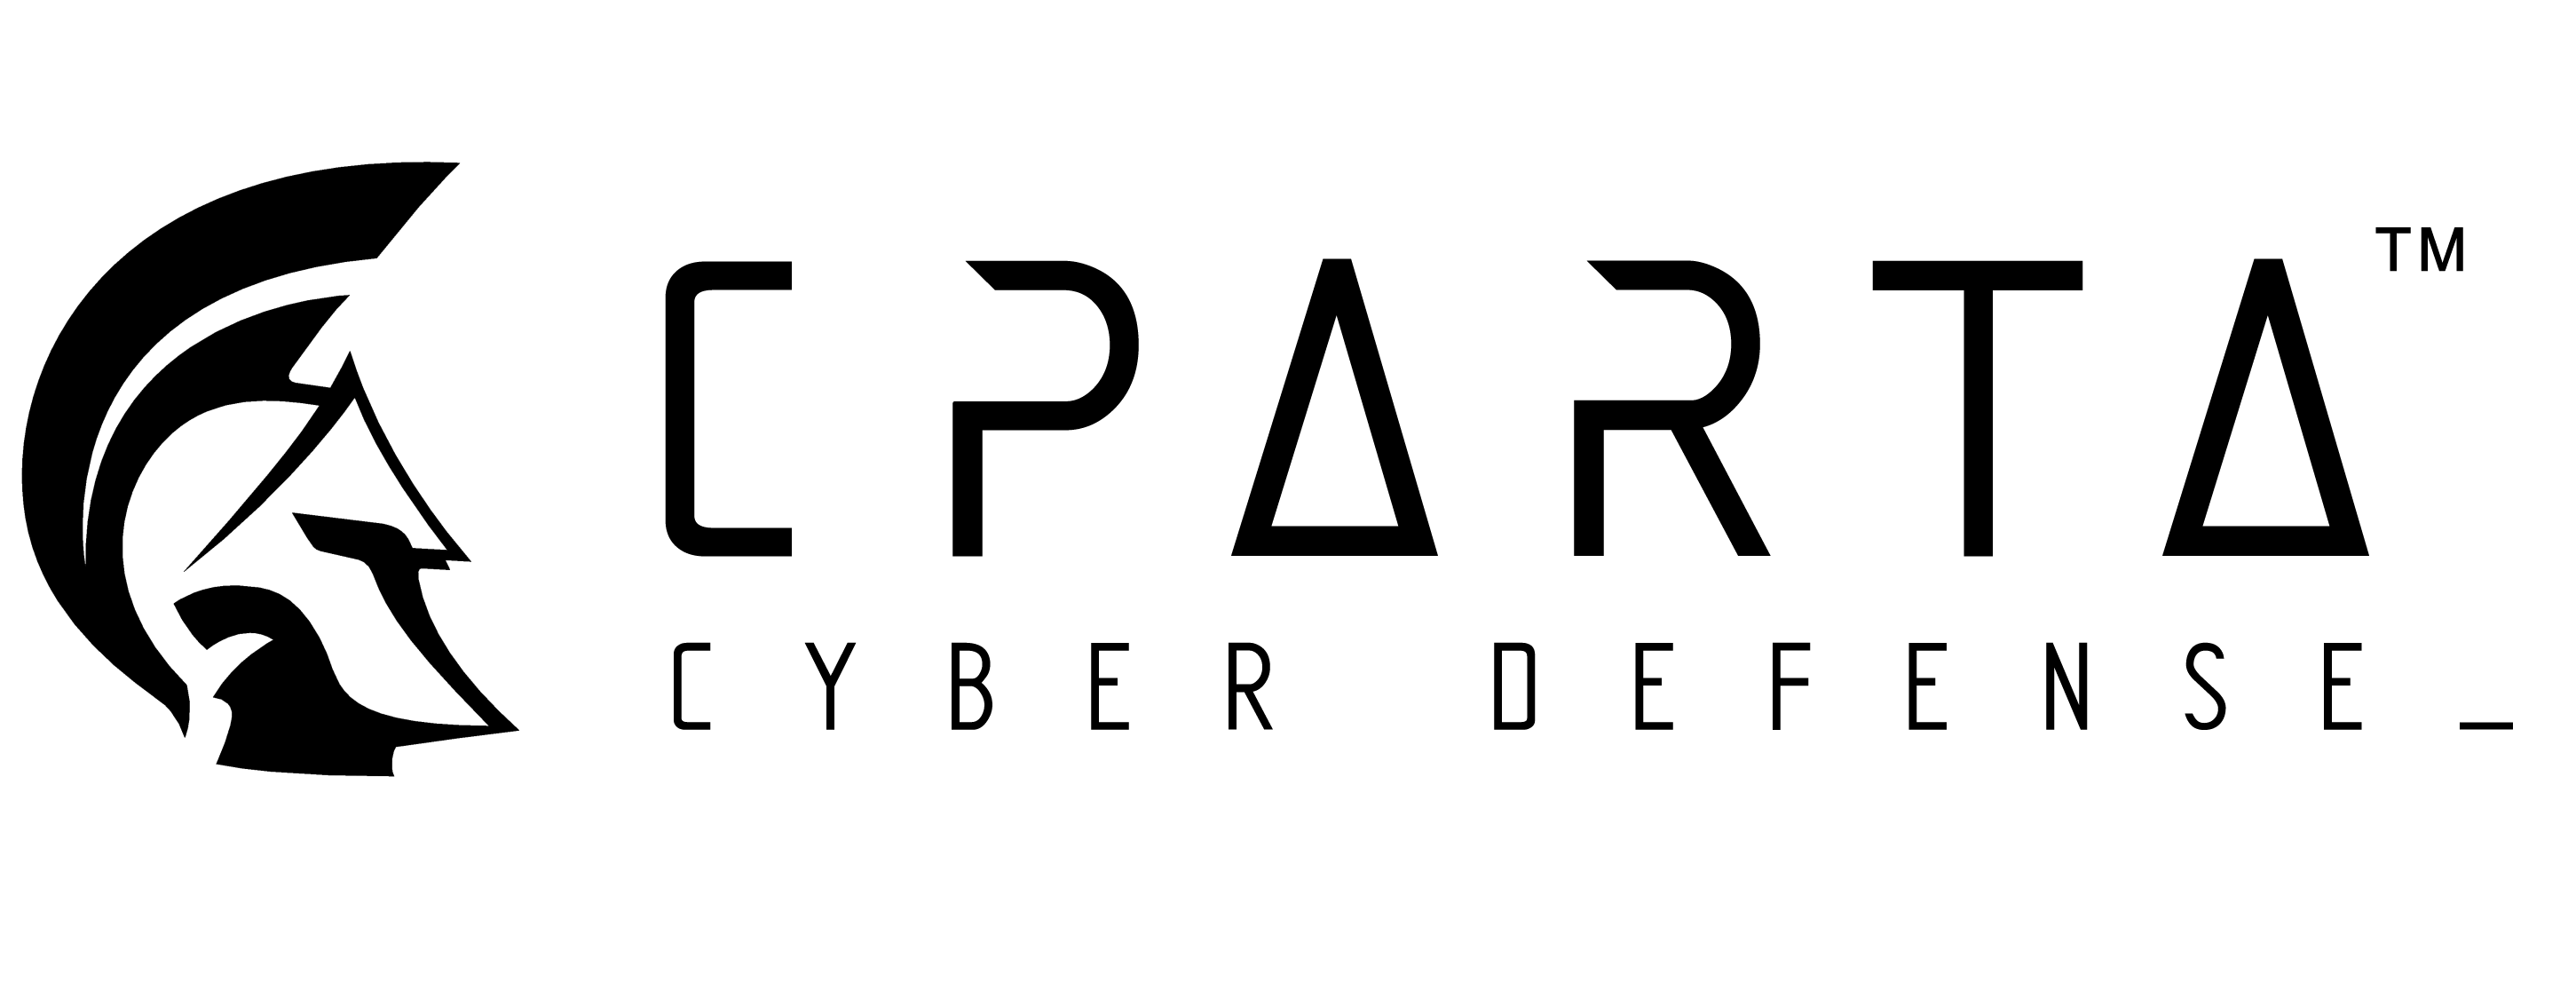 Cparta, sponsor of the Swedish National Hacking Team, SNHT